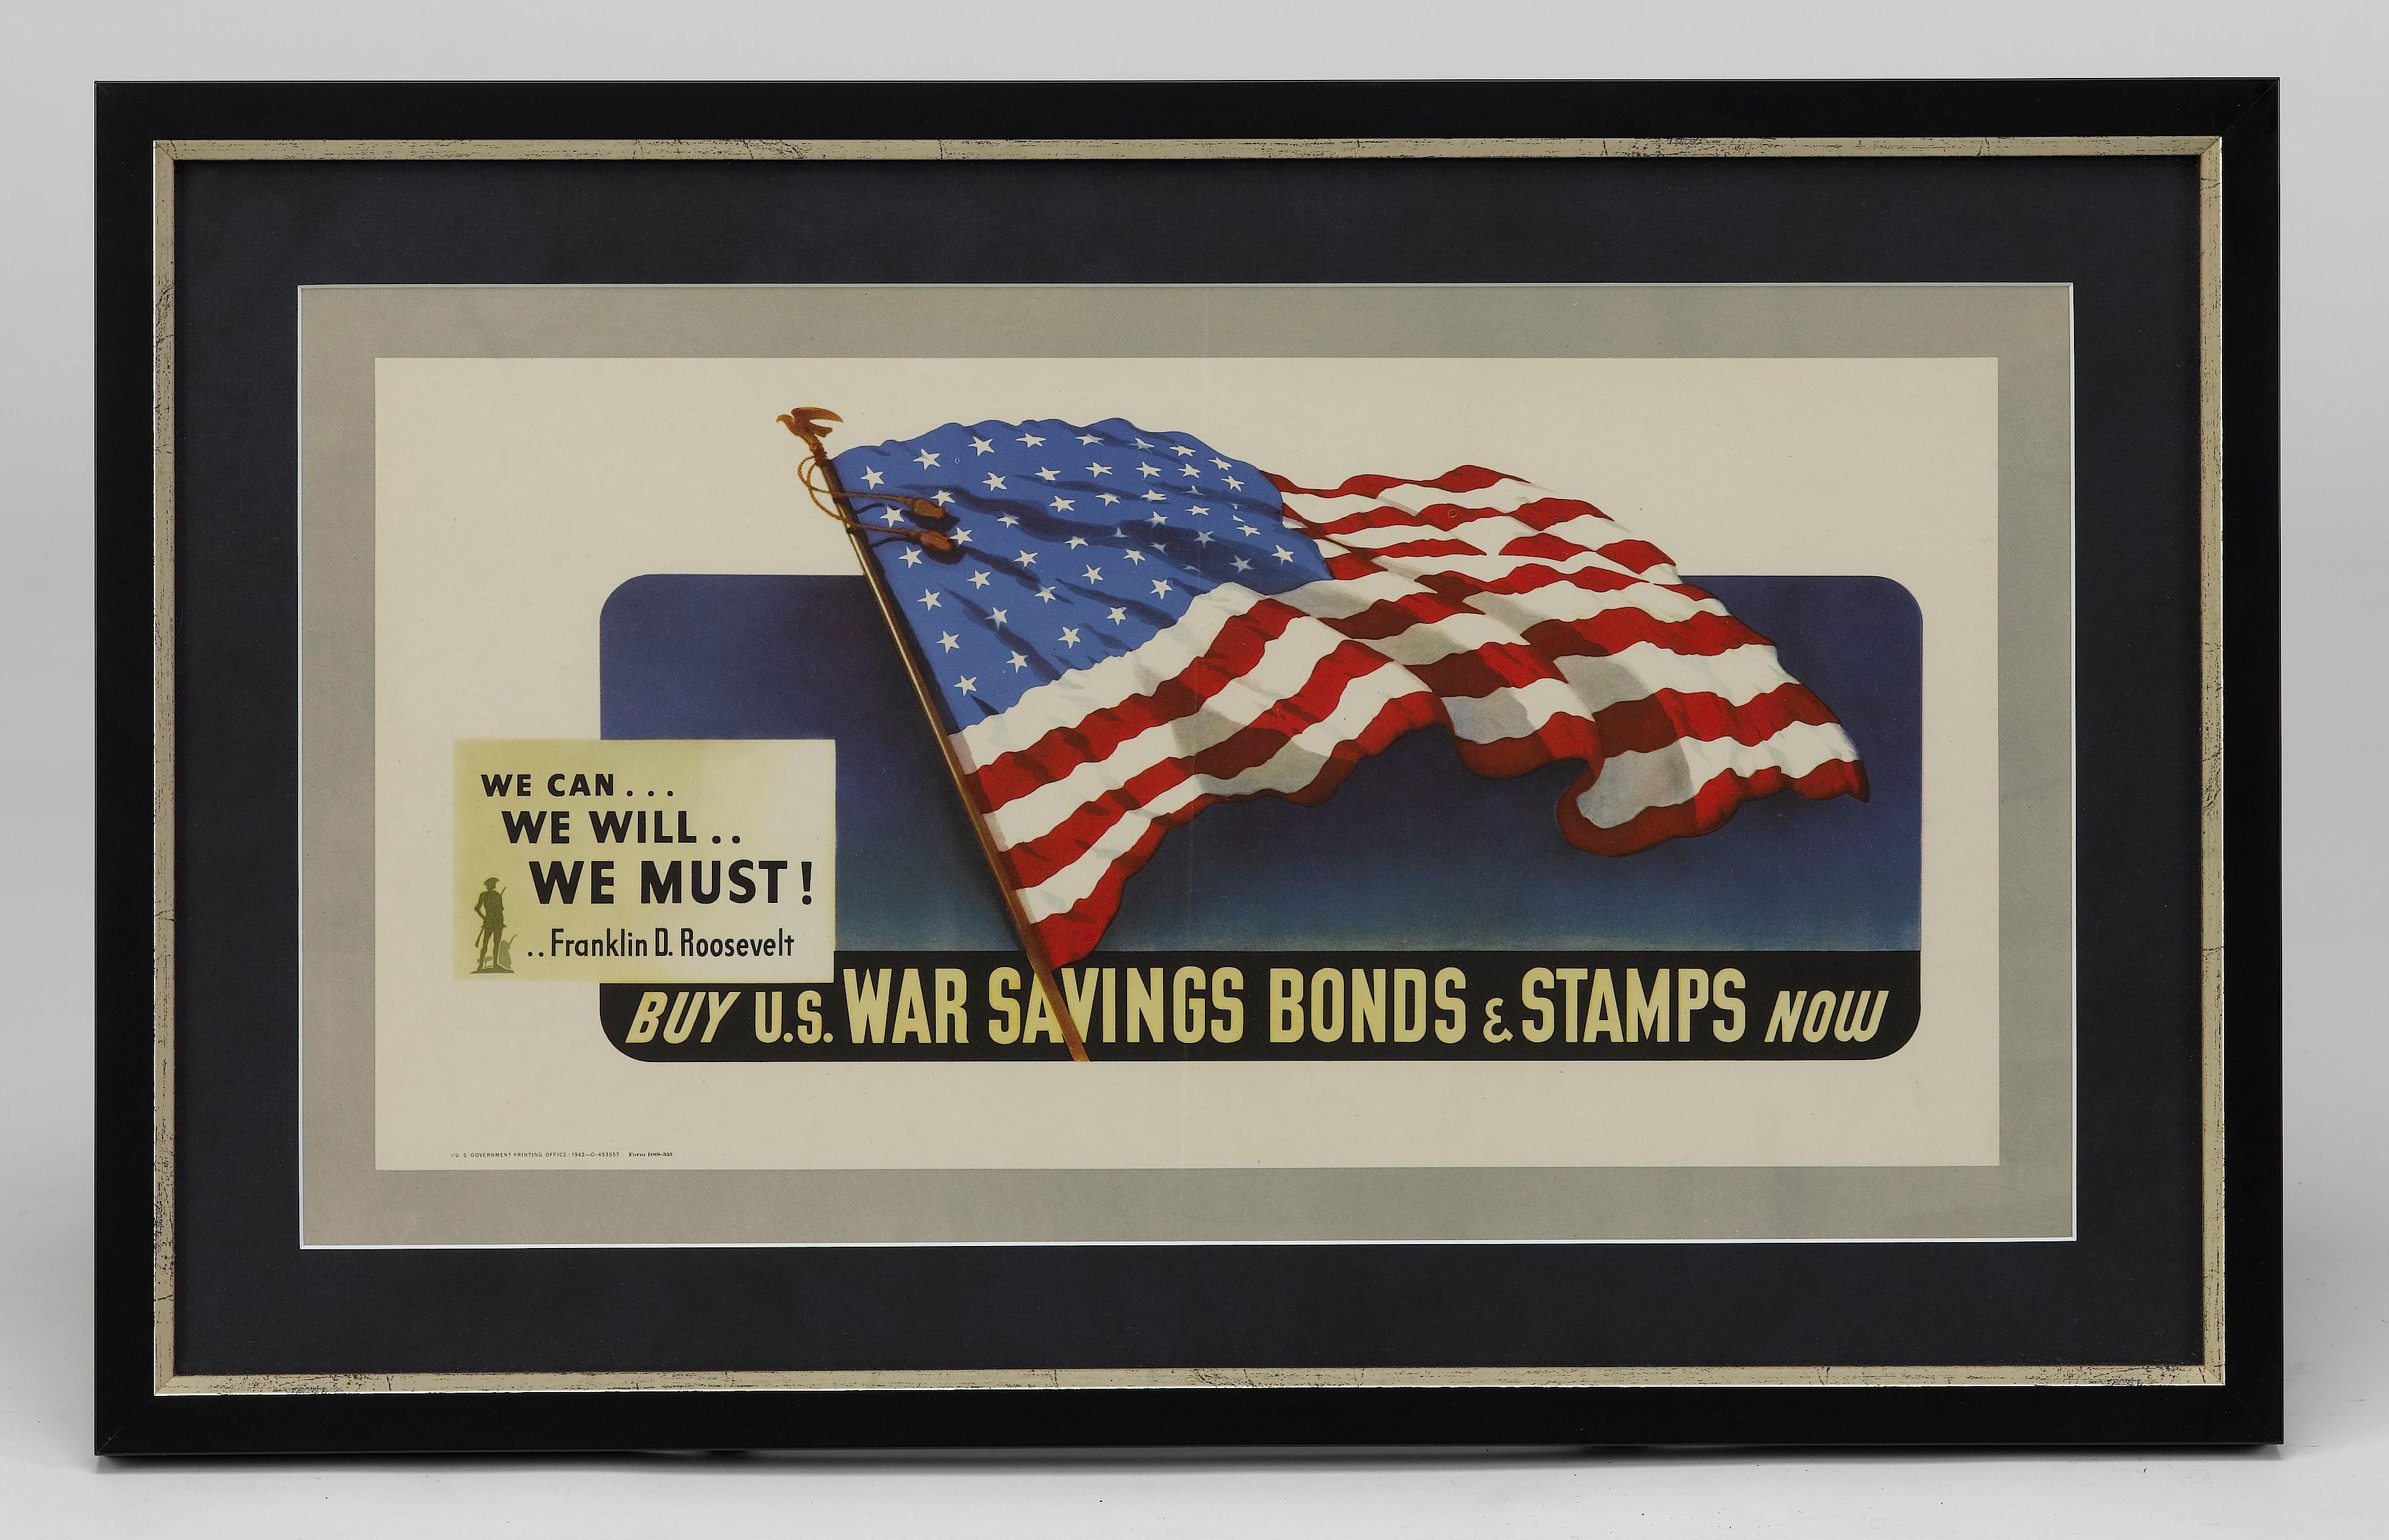 This is a vintage savings bond poster from WWII, dating to 1942. The poster reads 